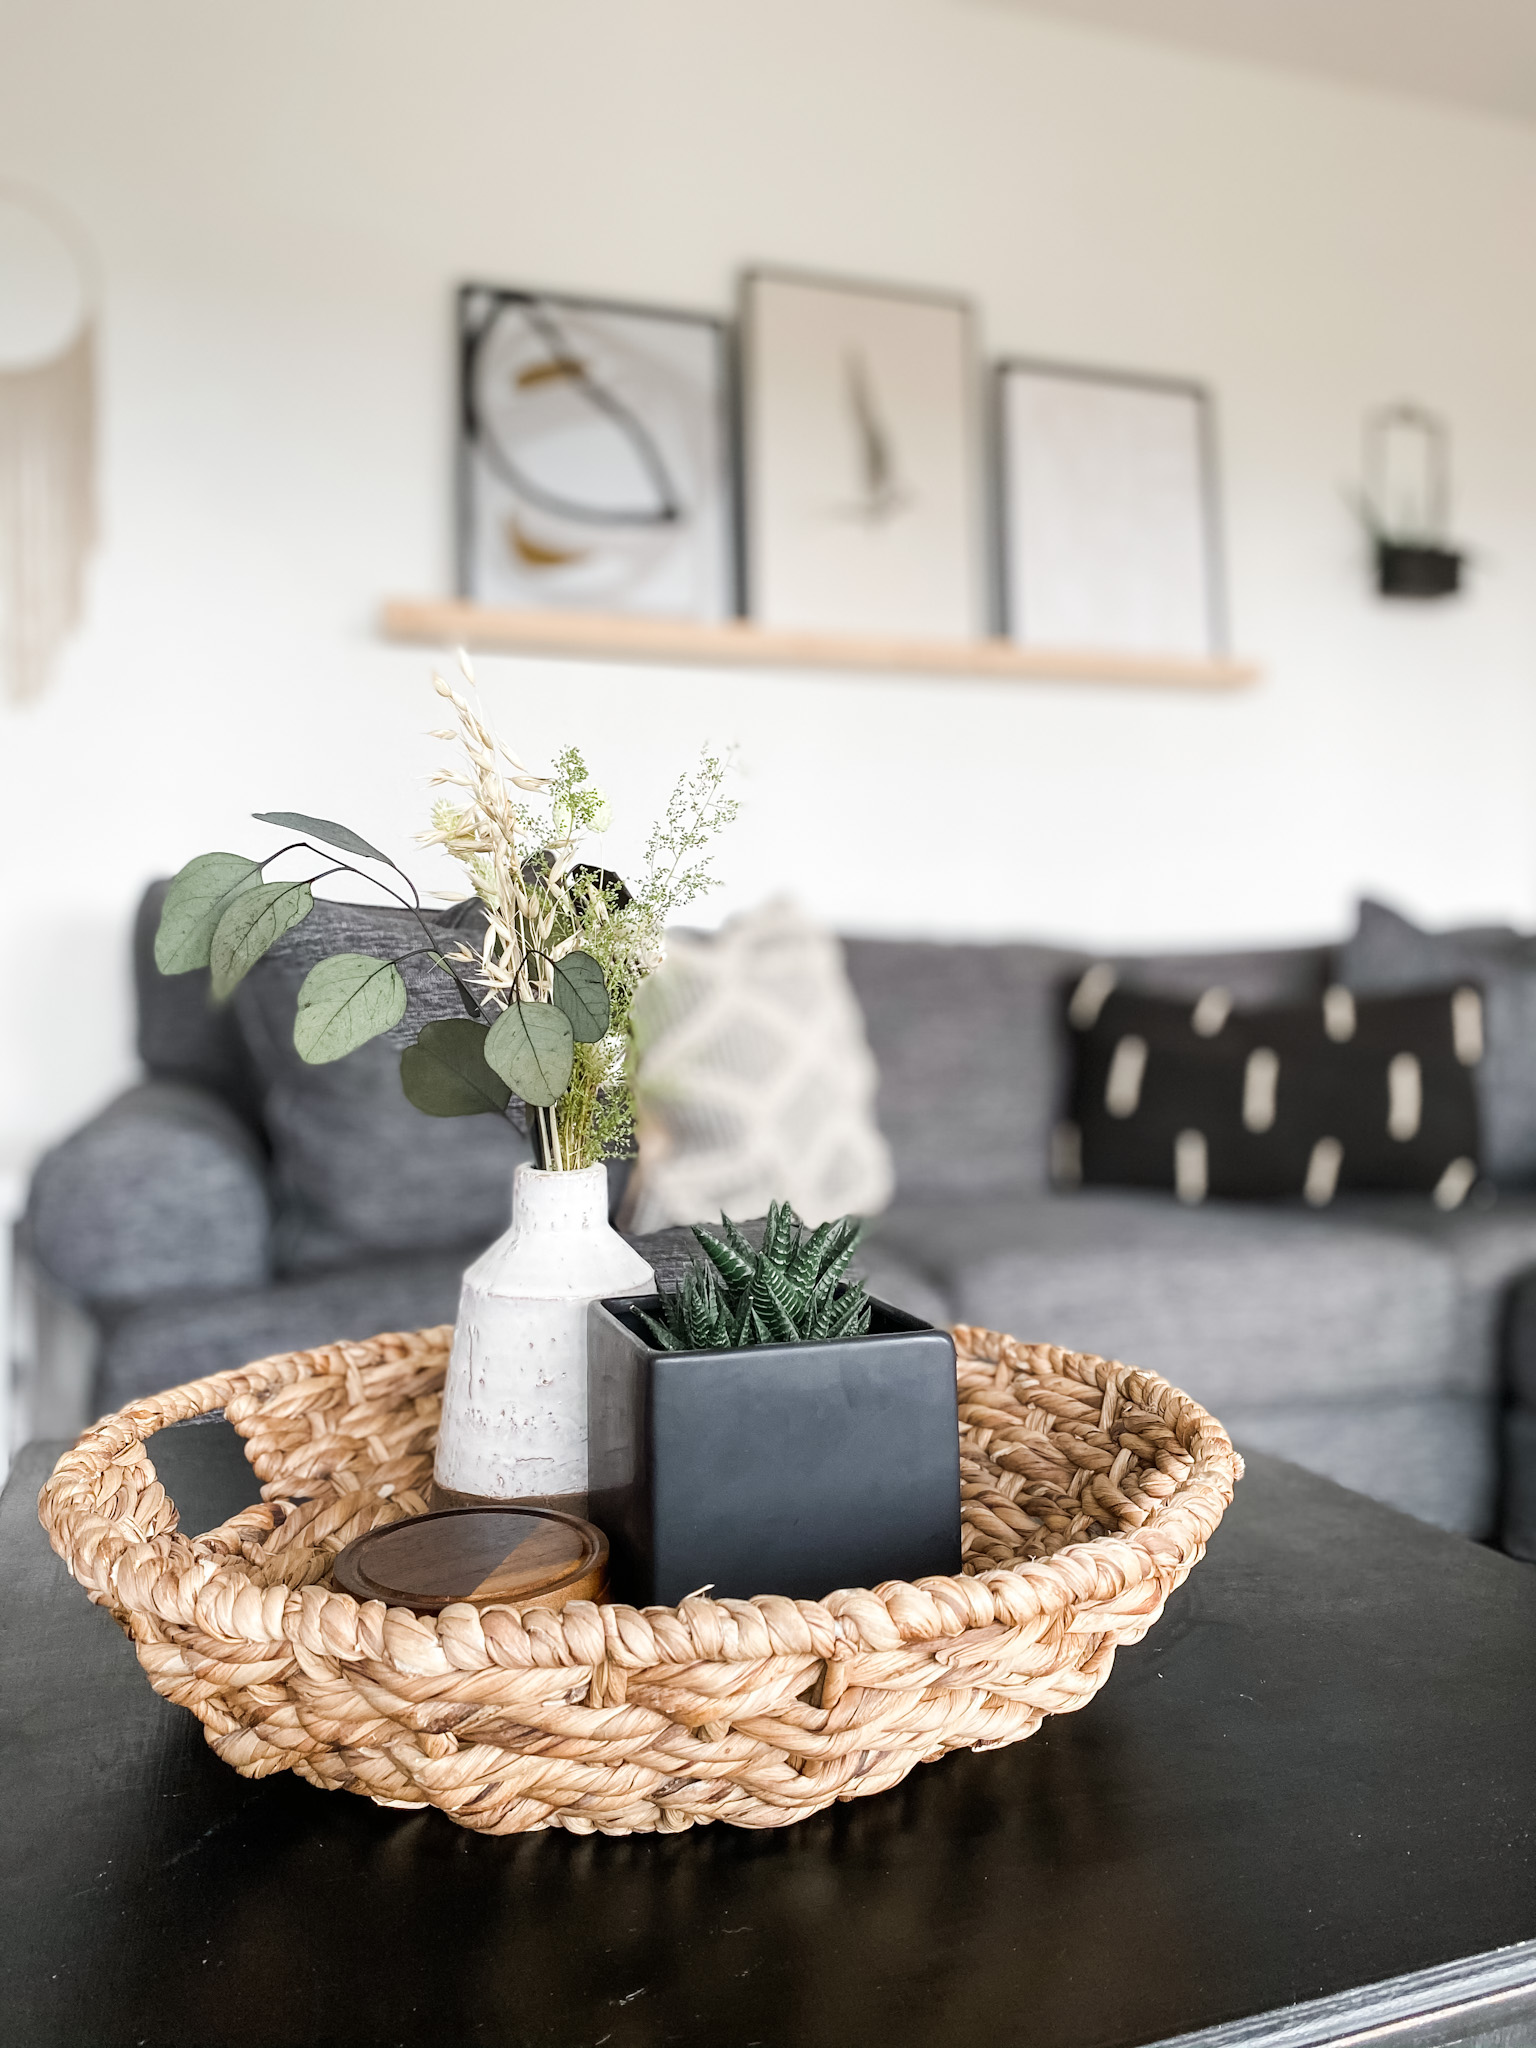 How To Organize With Baskets In Every Room Of Your Home